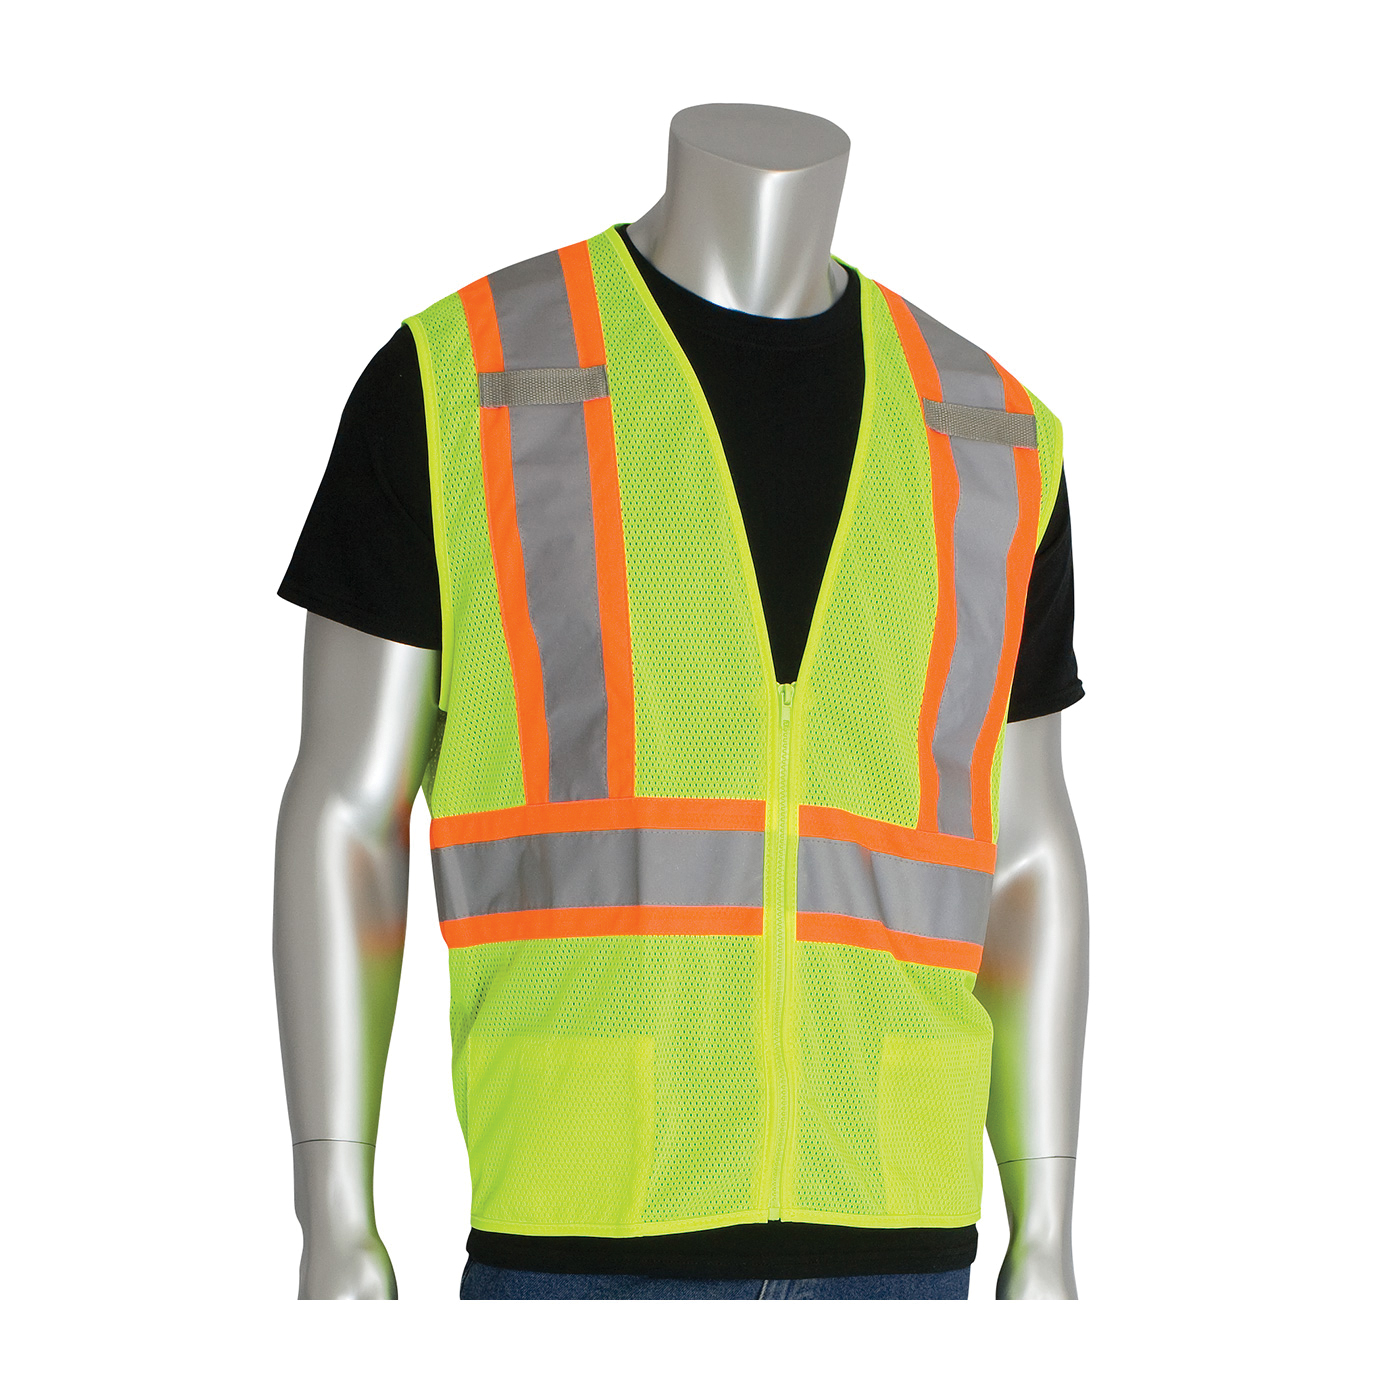 PIP® 302-0600D-LY/M 2-Tone Safety Access Vest With "D" Ring Access, M, Hi-Viz Lime Yellow, Polyester, Zipper Closure, 2 Pockets, ANSI Class: Class 2, Specifications Met: ANSI 107 Type R